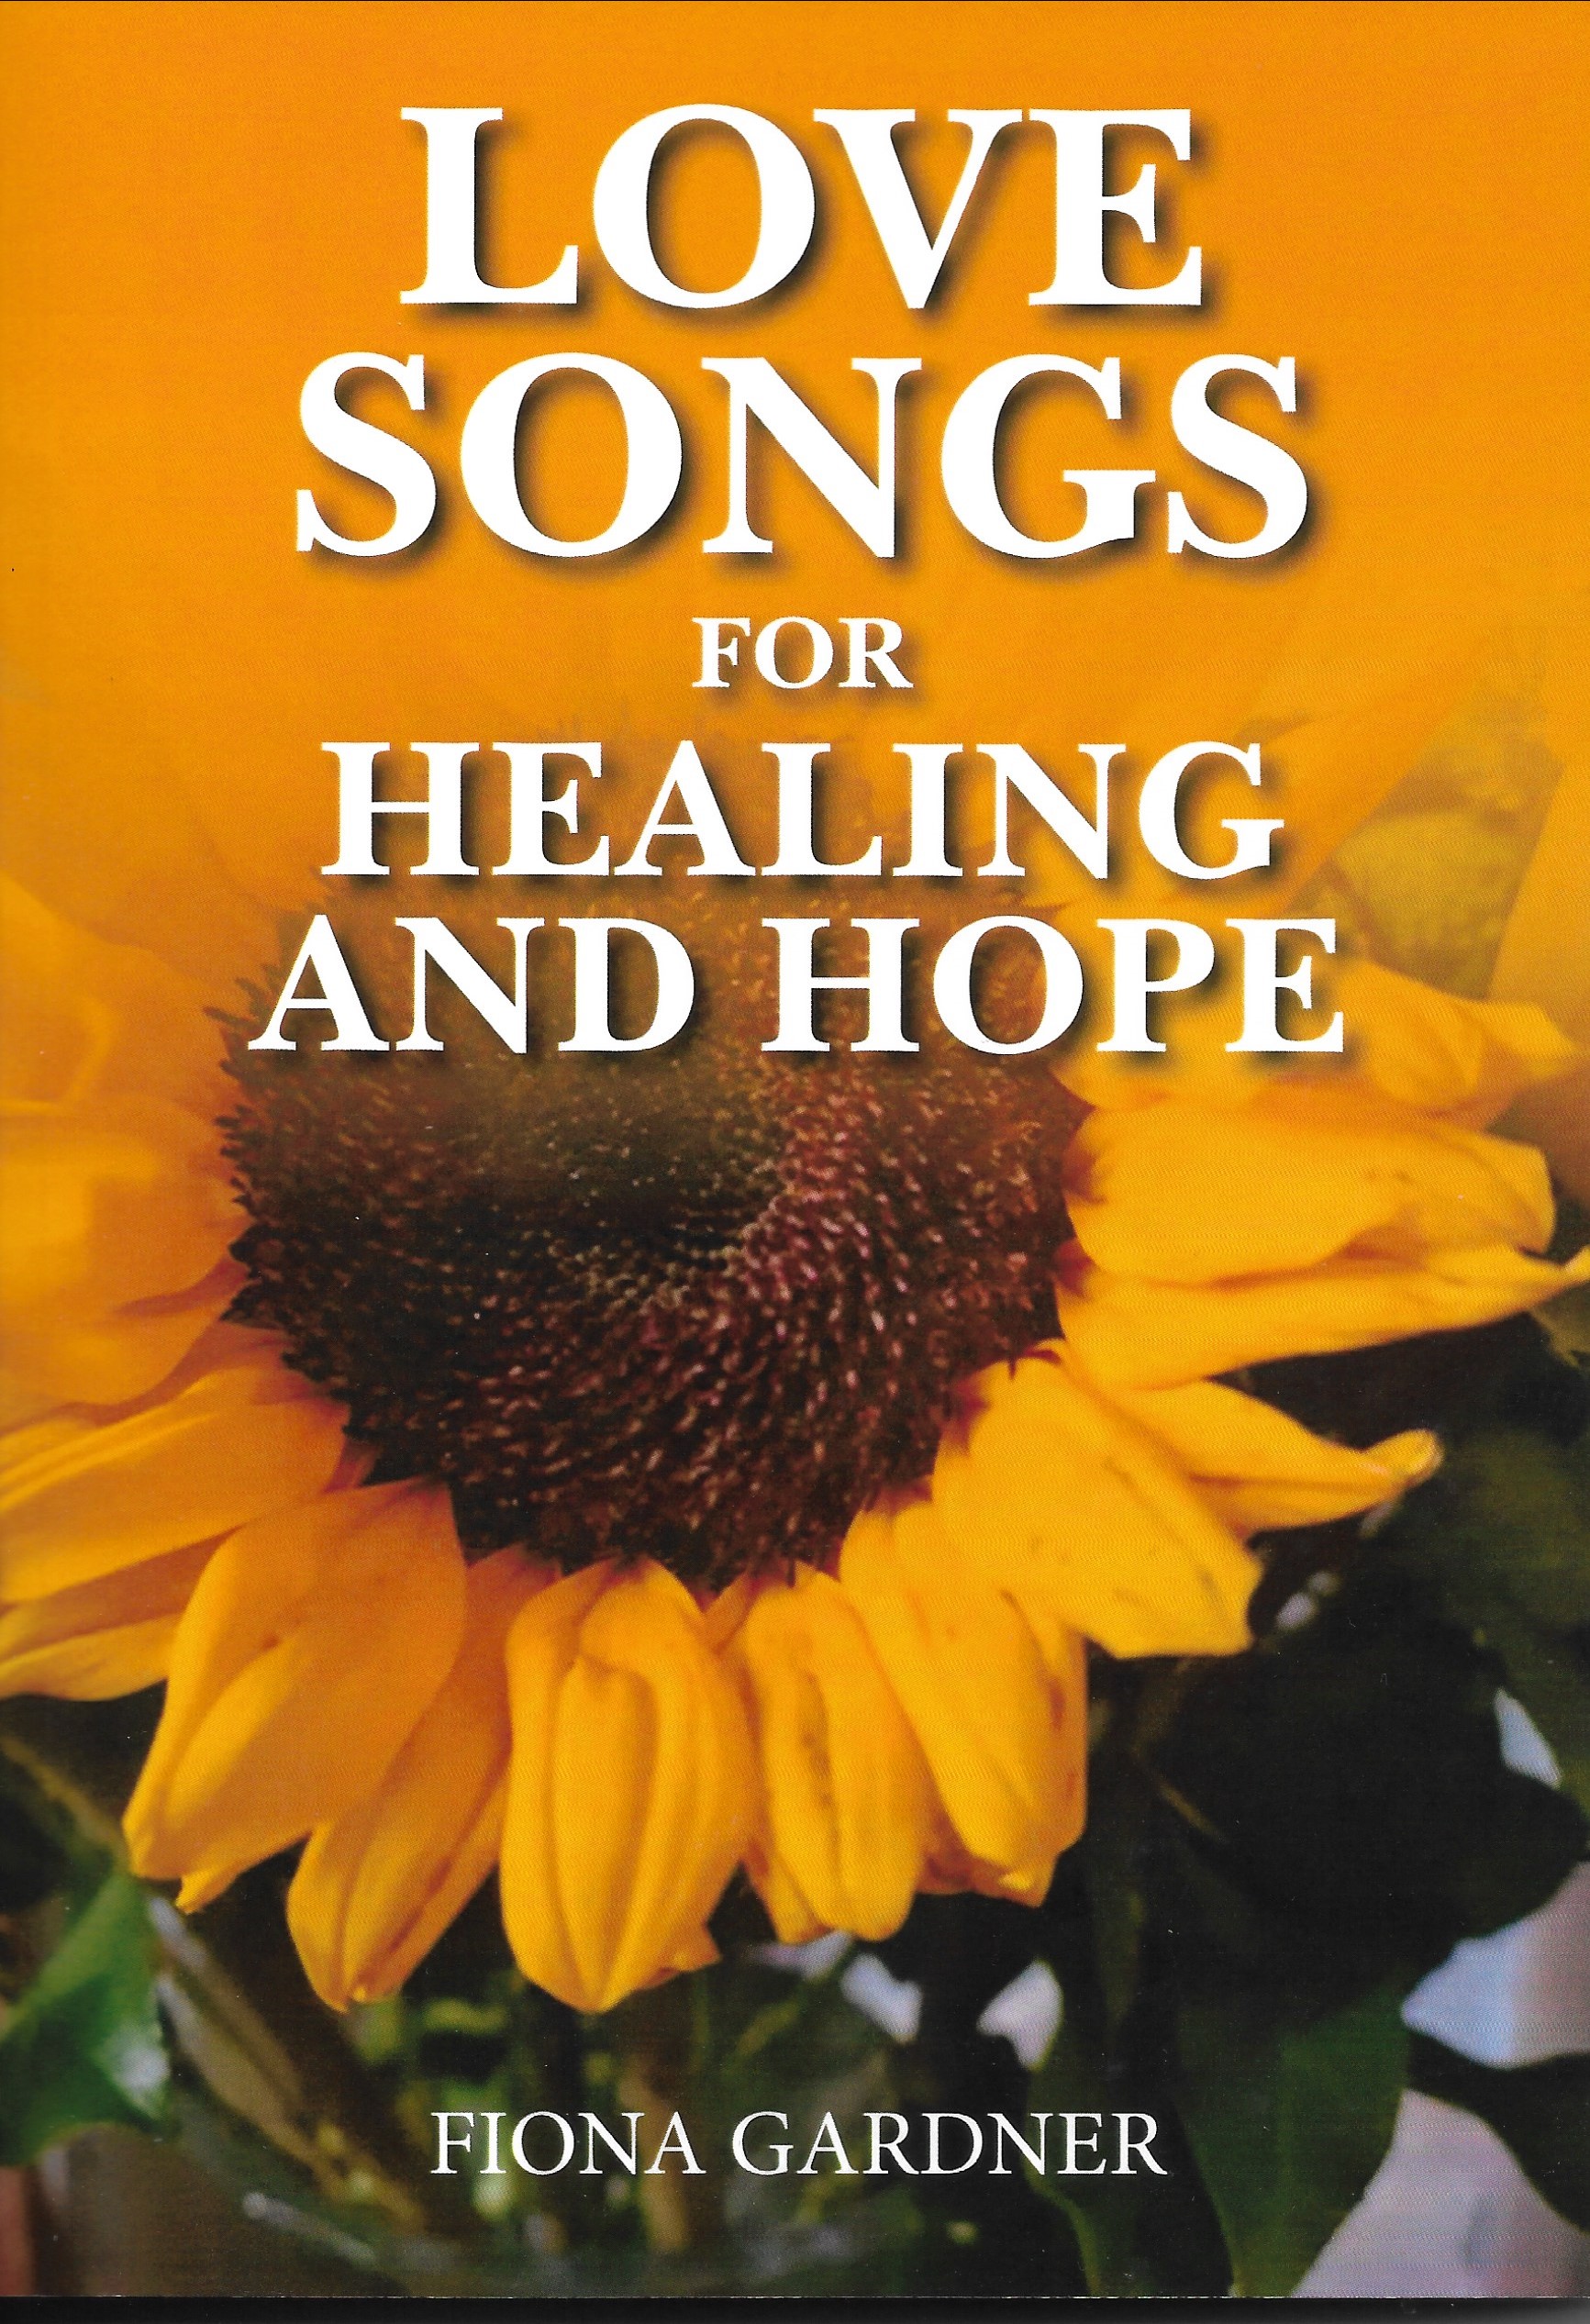 fionas book healing and hope resized for website